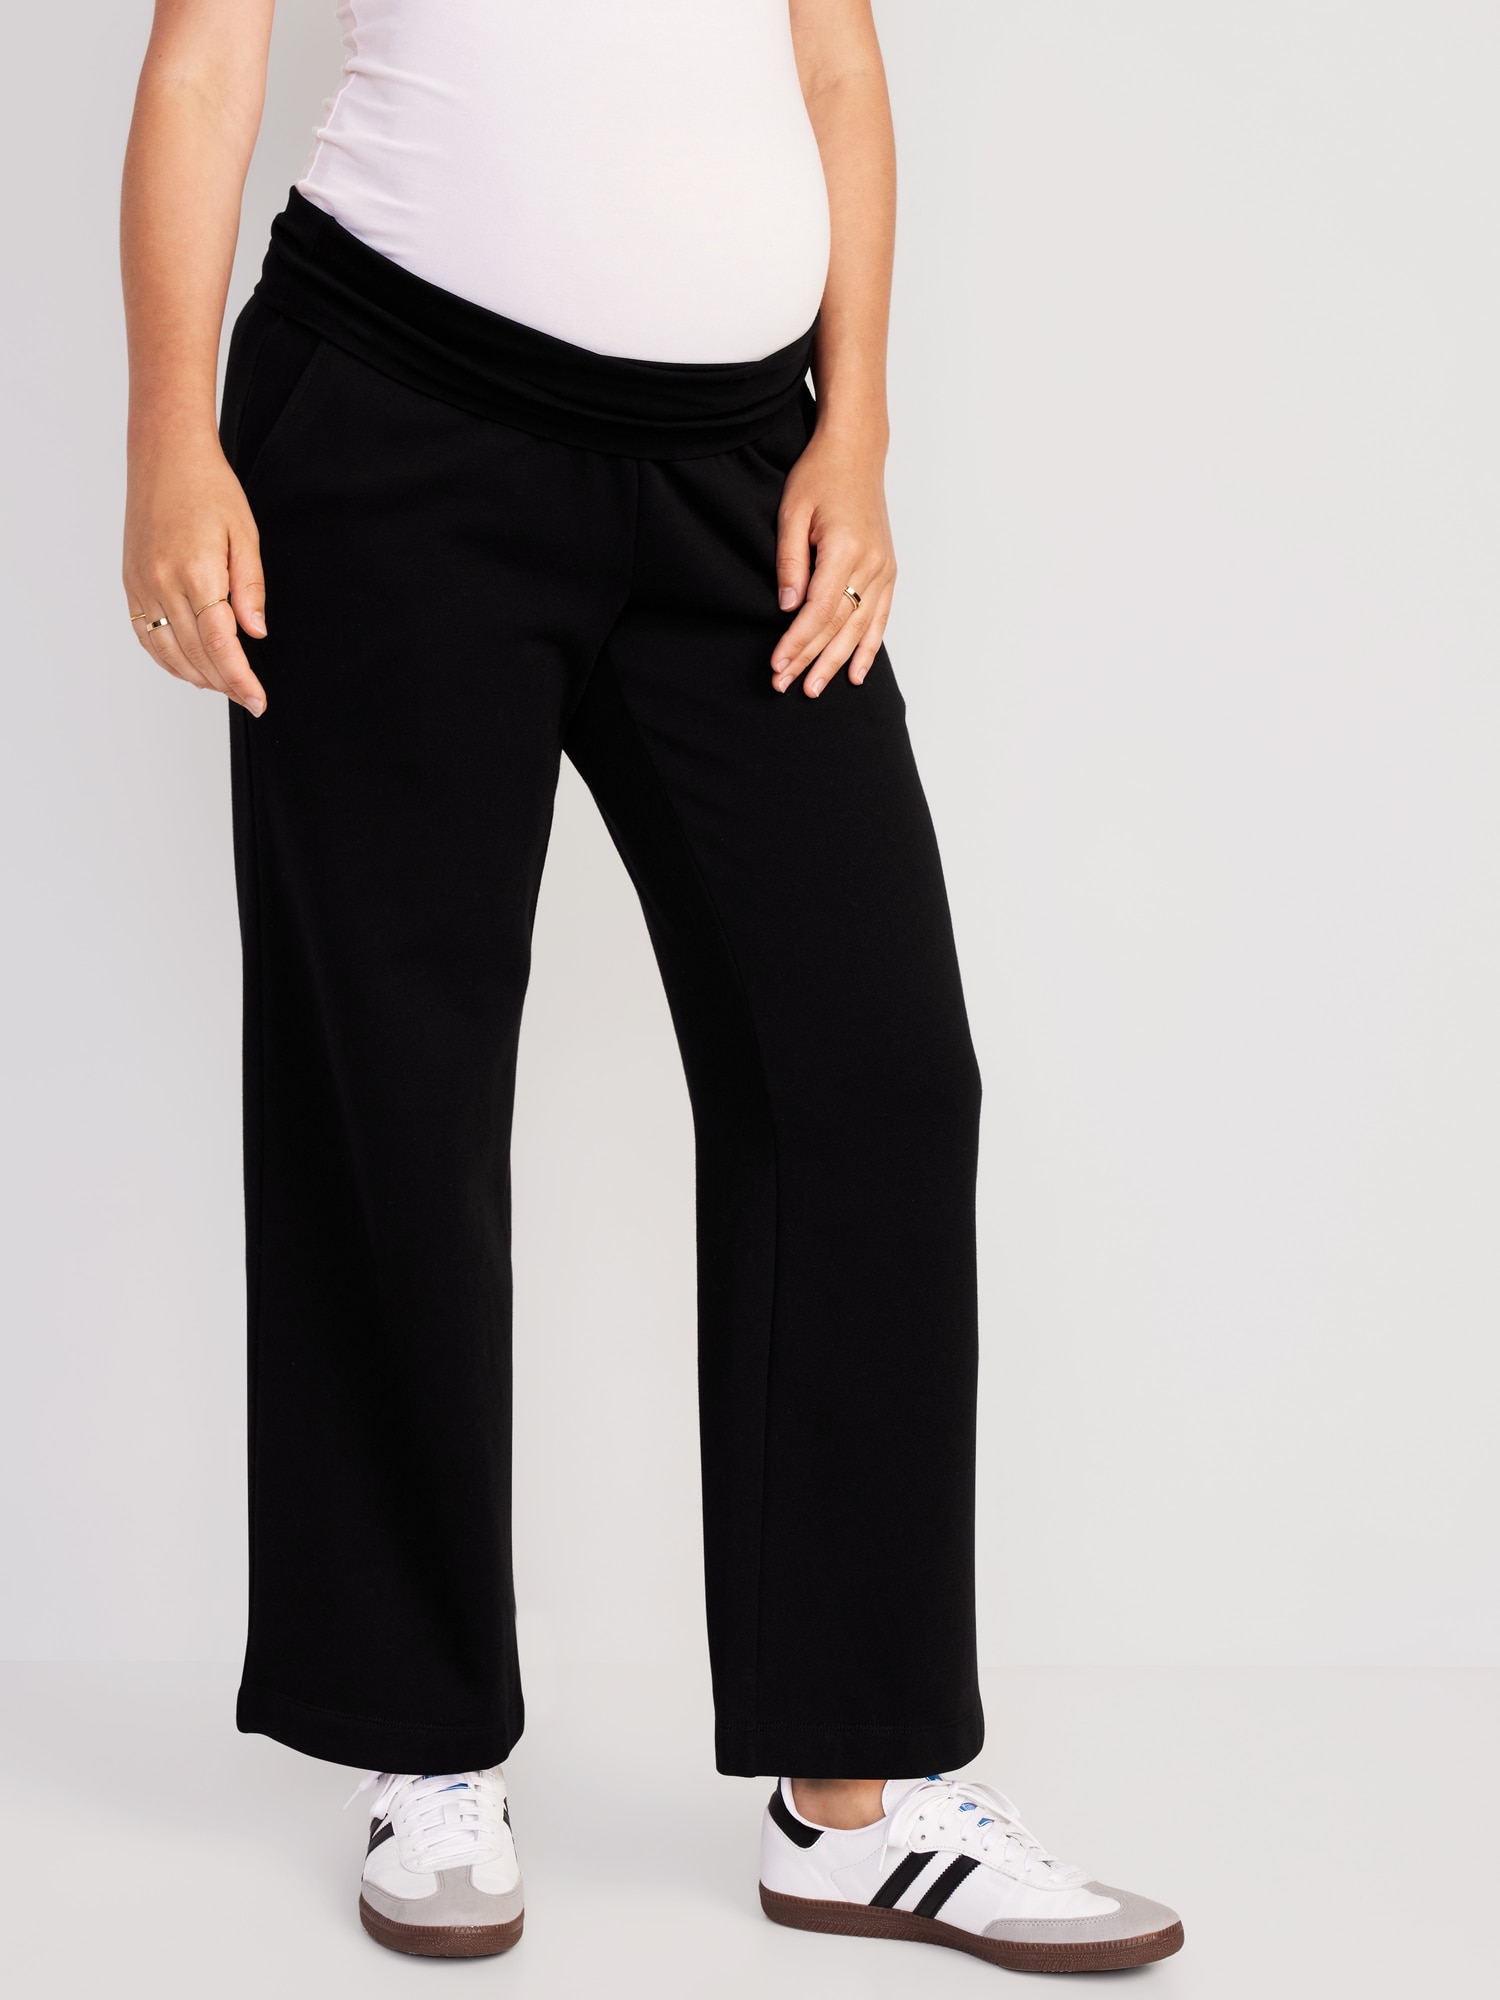 Old Navy Maternity Rollover-Waist Sweatpants Size L- Black- NWT